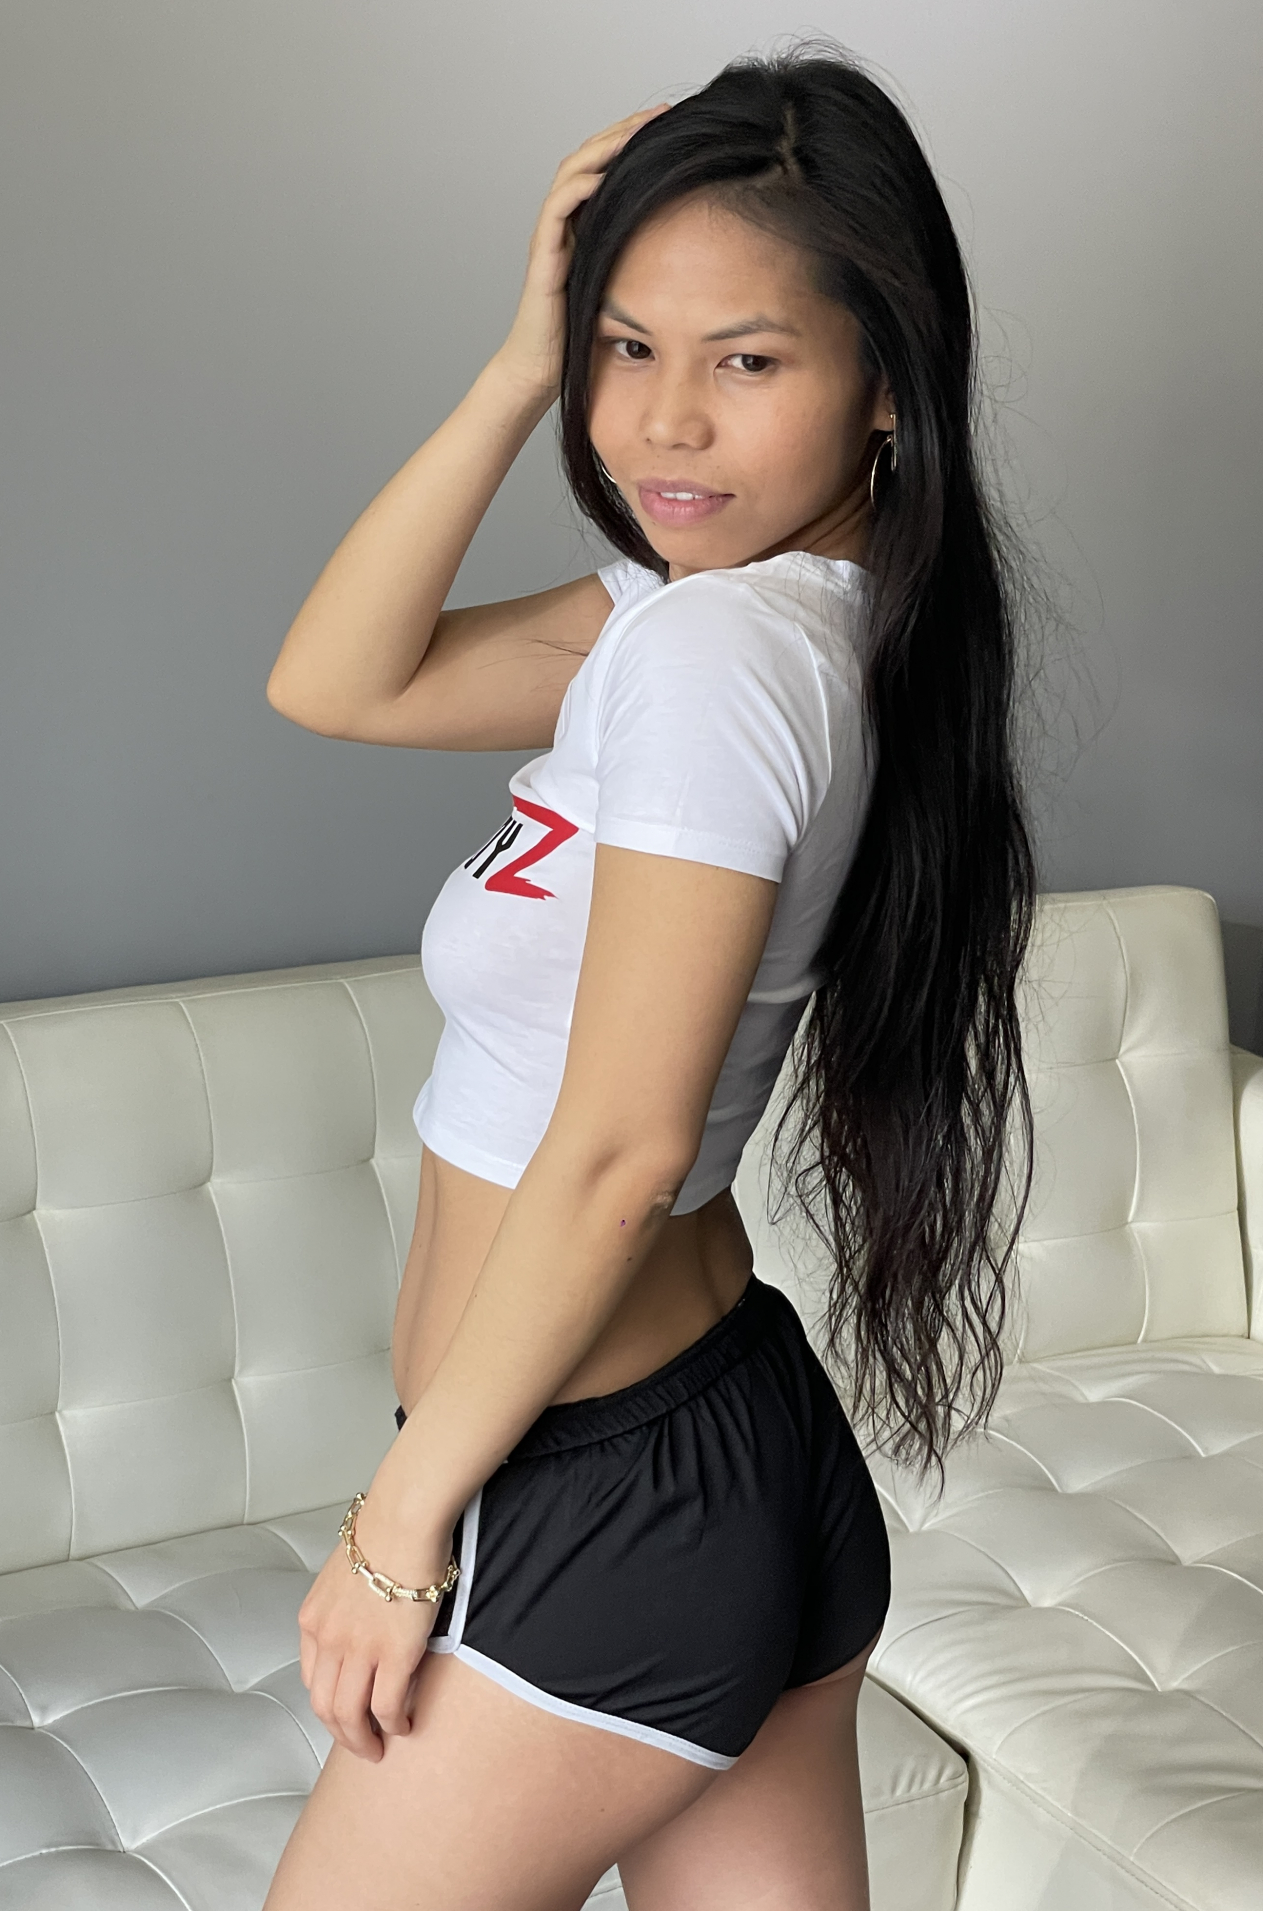 Ling Ling Girl Sax - Evie Ling - Whoaboyz - Amateur HD Porn Videos and Reality Porn Sex Movies